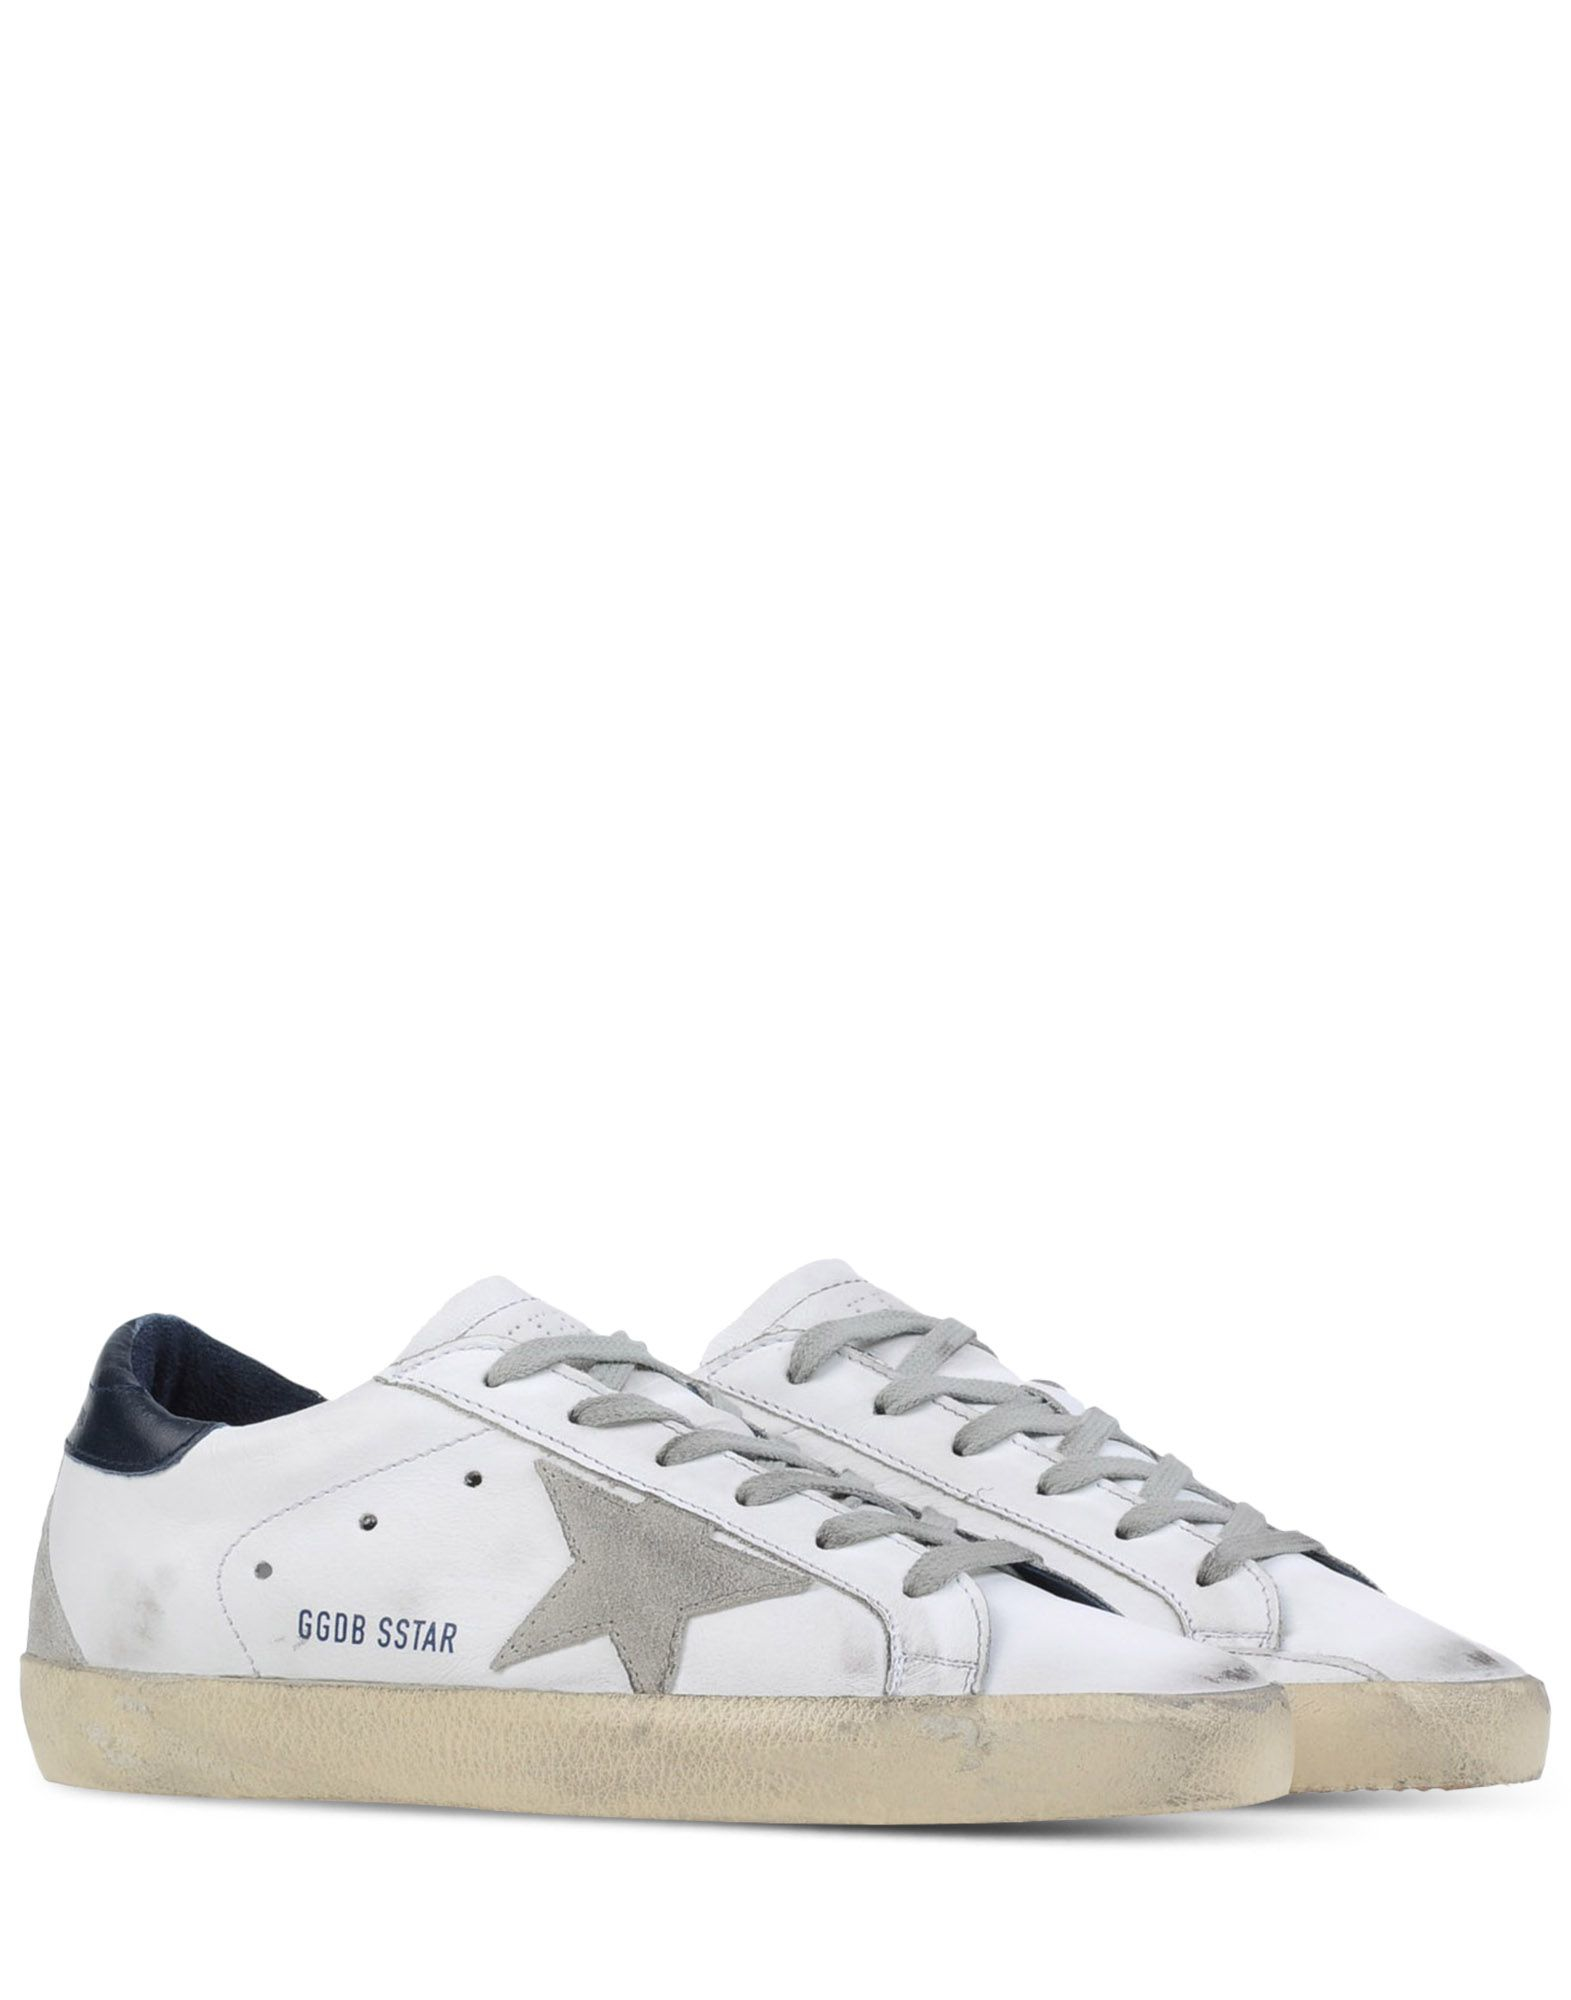 Golden goose deluxe brand Low-tops & Trainers in White